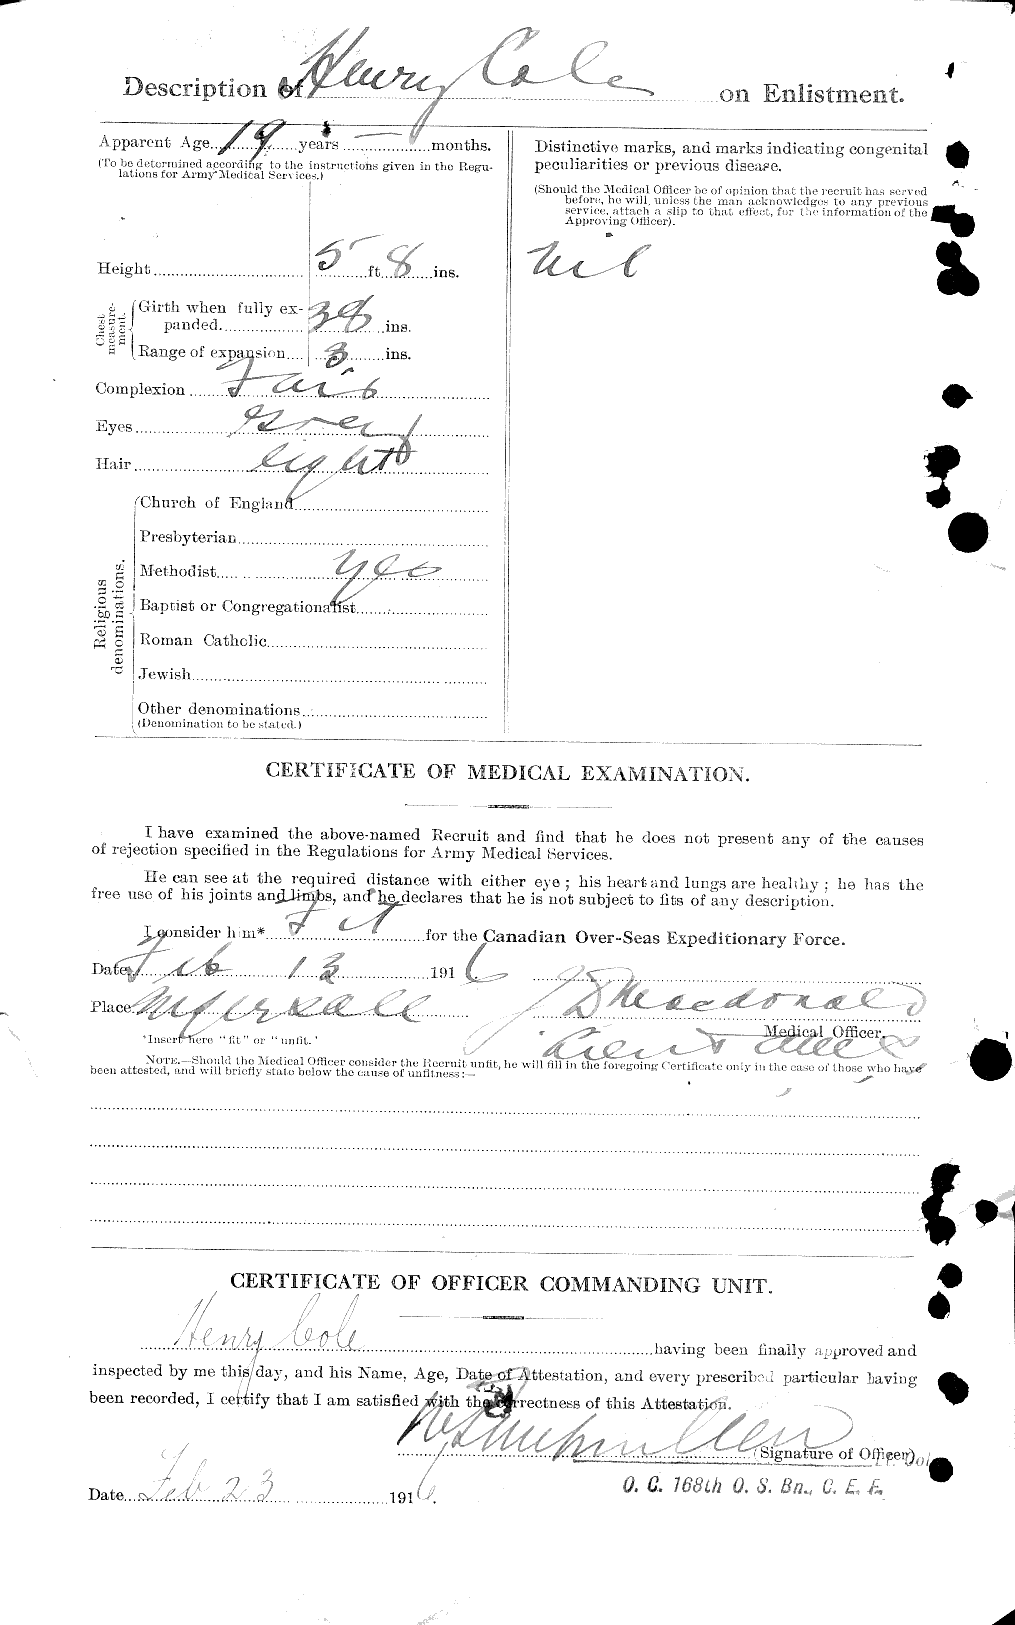 Personnel Records of the First World War - CEF 027797b